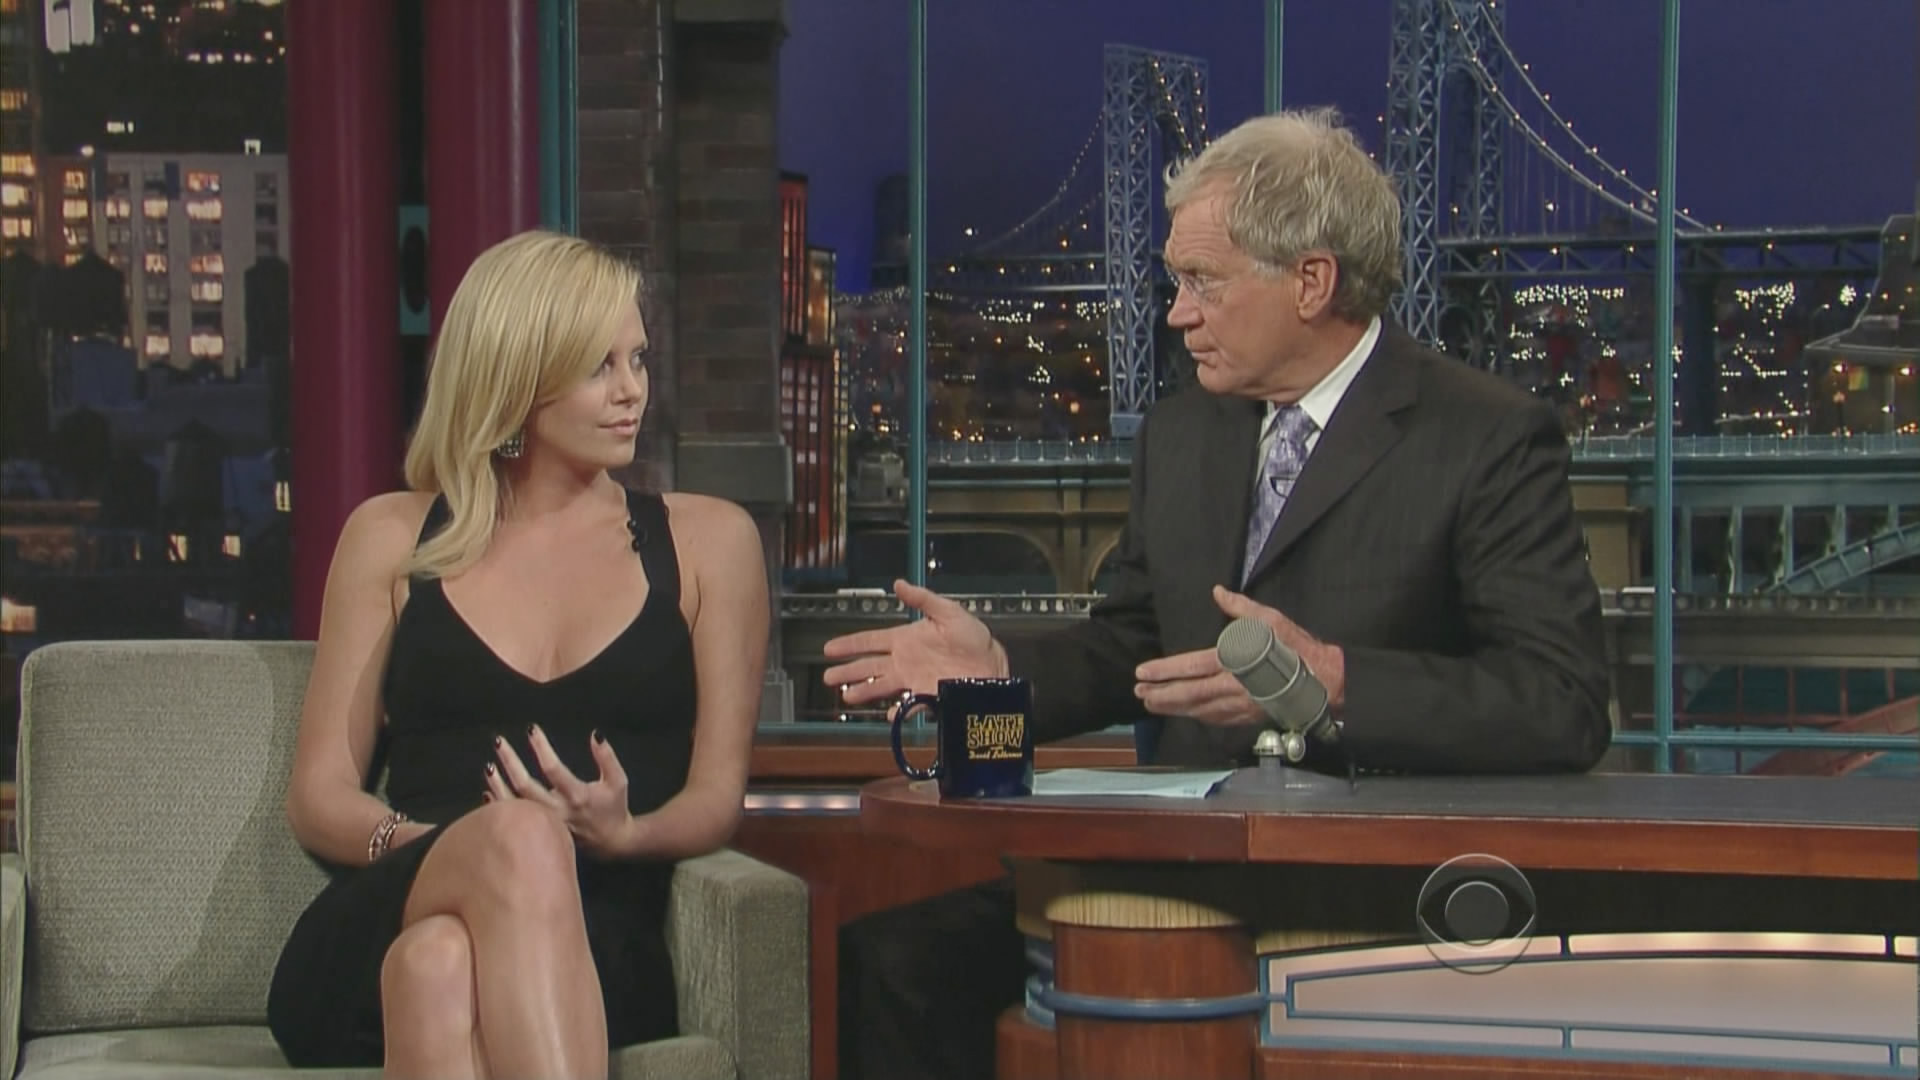 Late Show with David Letterman nude pics.